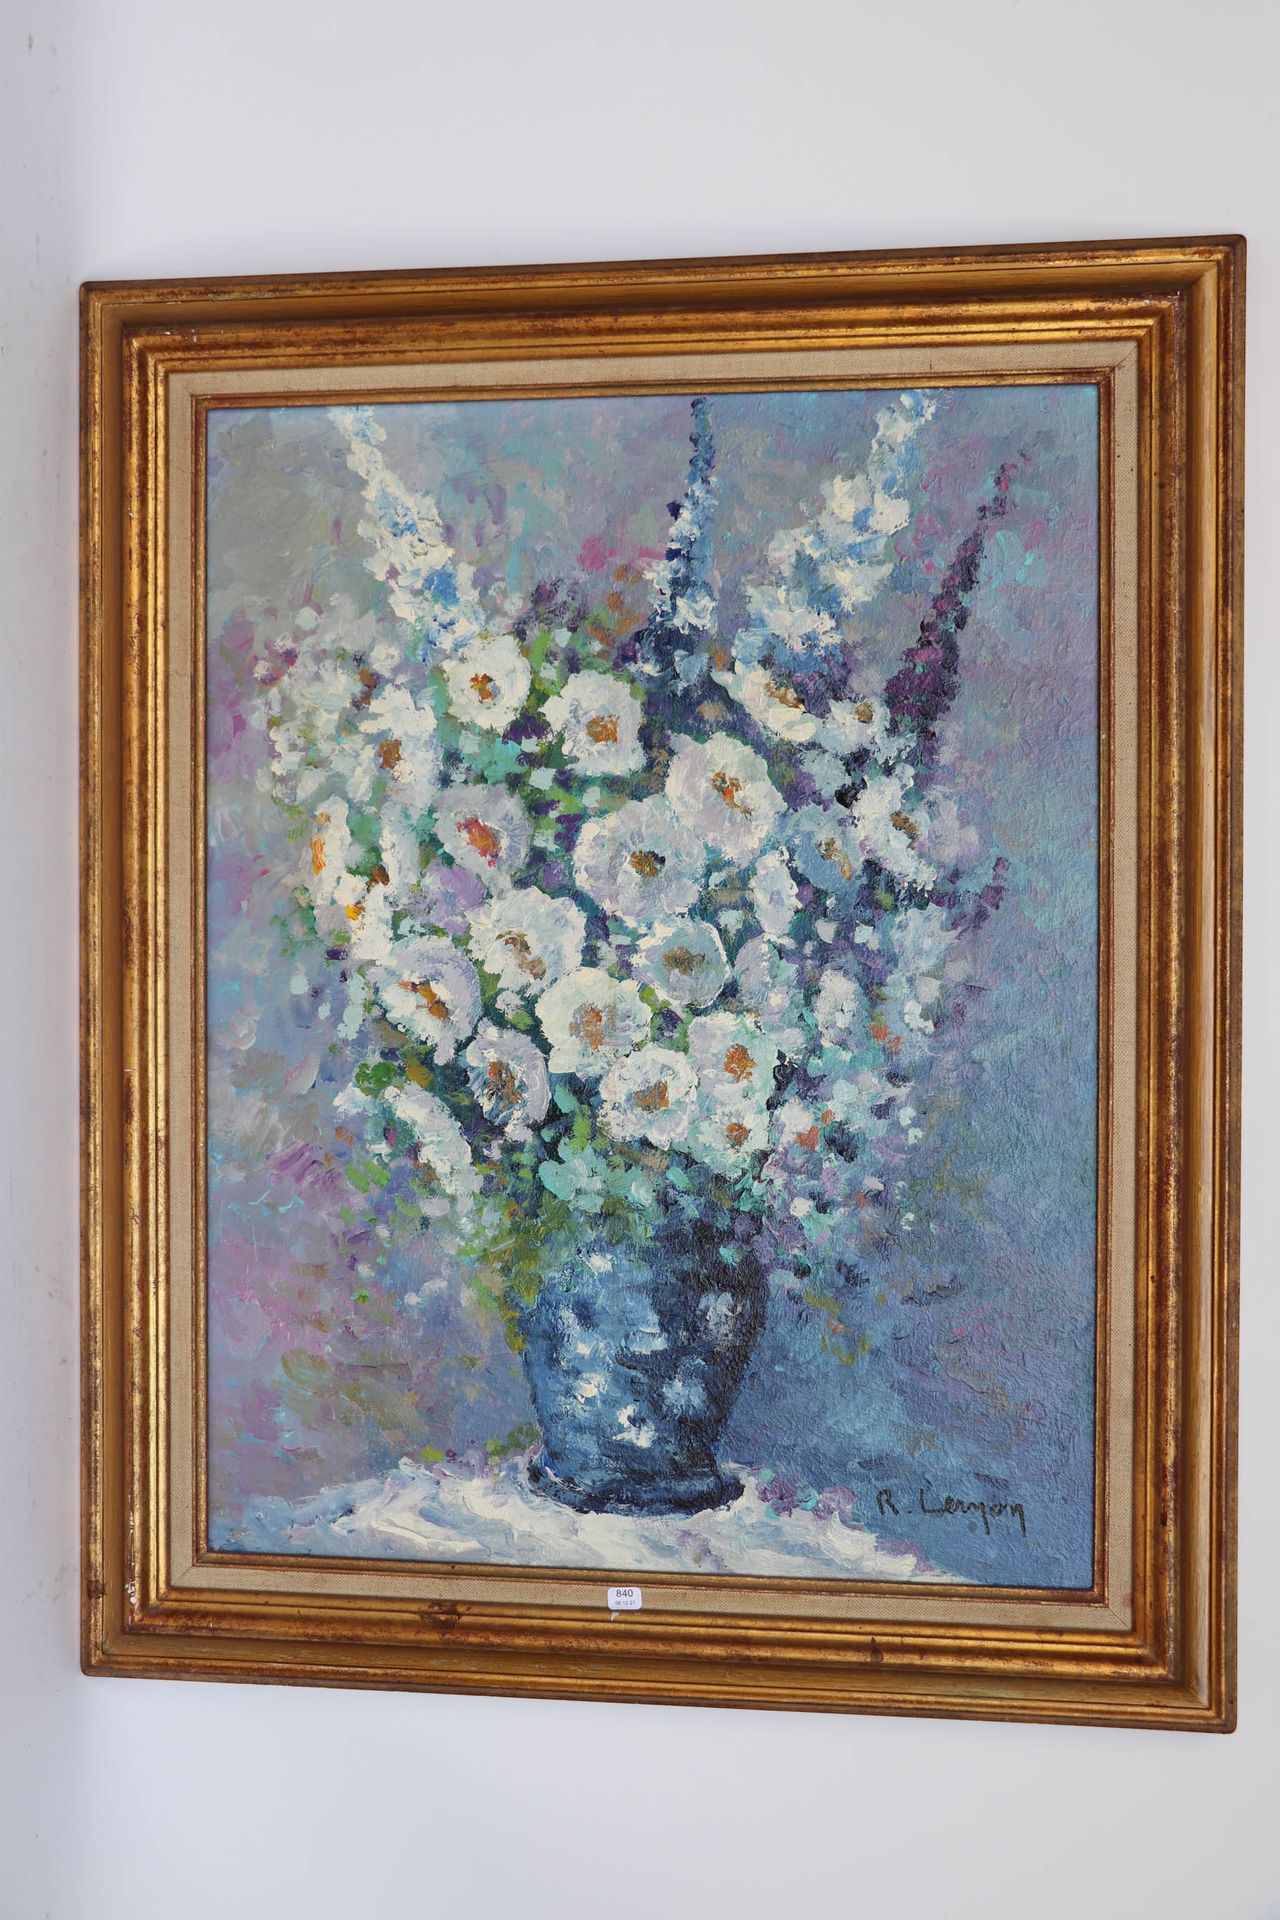 Null LERNON René-Jacques (born in 1921). "Blue flowers". Oil on canvas signed lo&hellip;